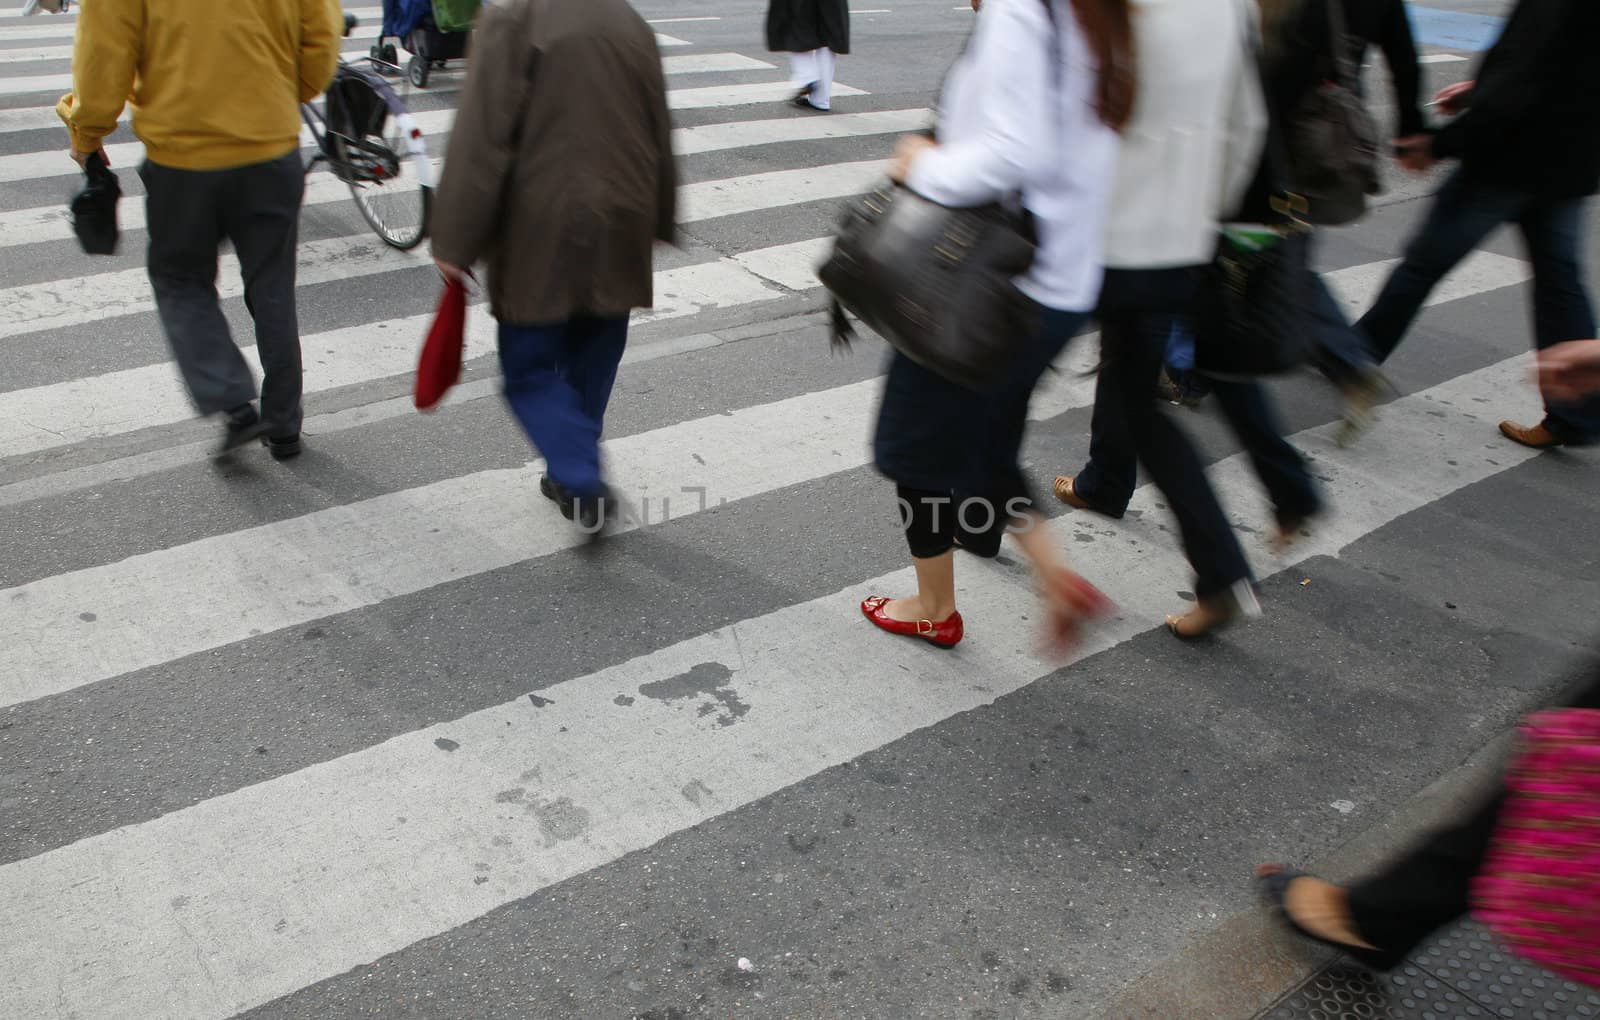 Rush hour in an urban  zebra crossing. Focus on red shoe. With place for text.